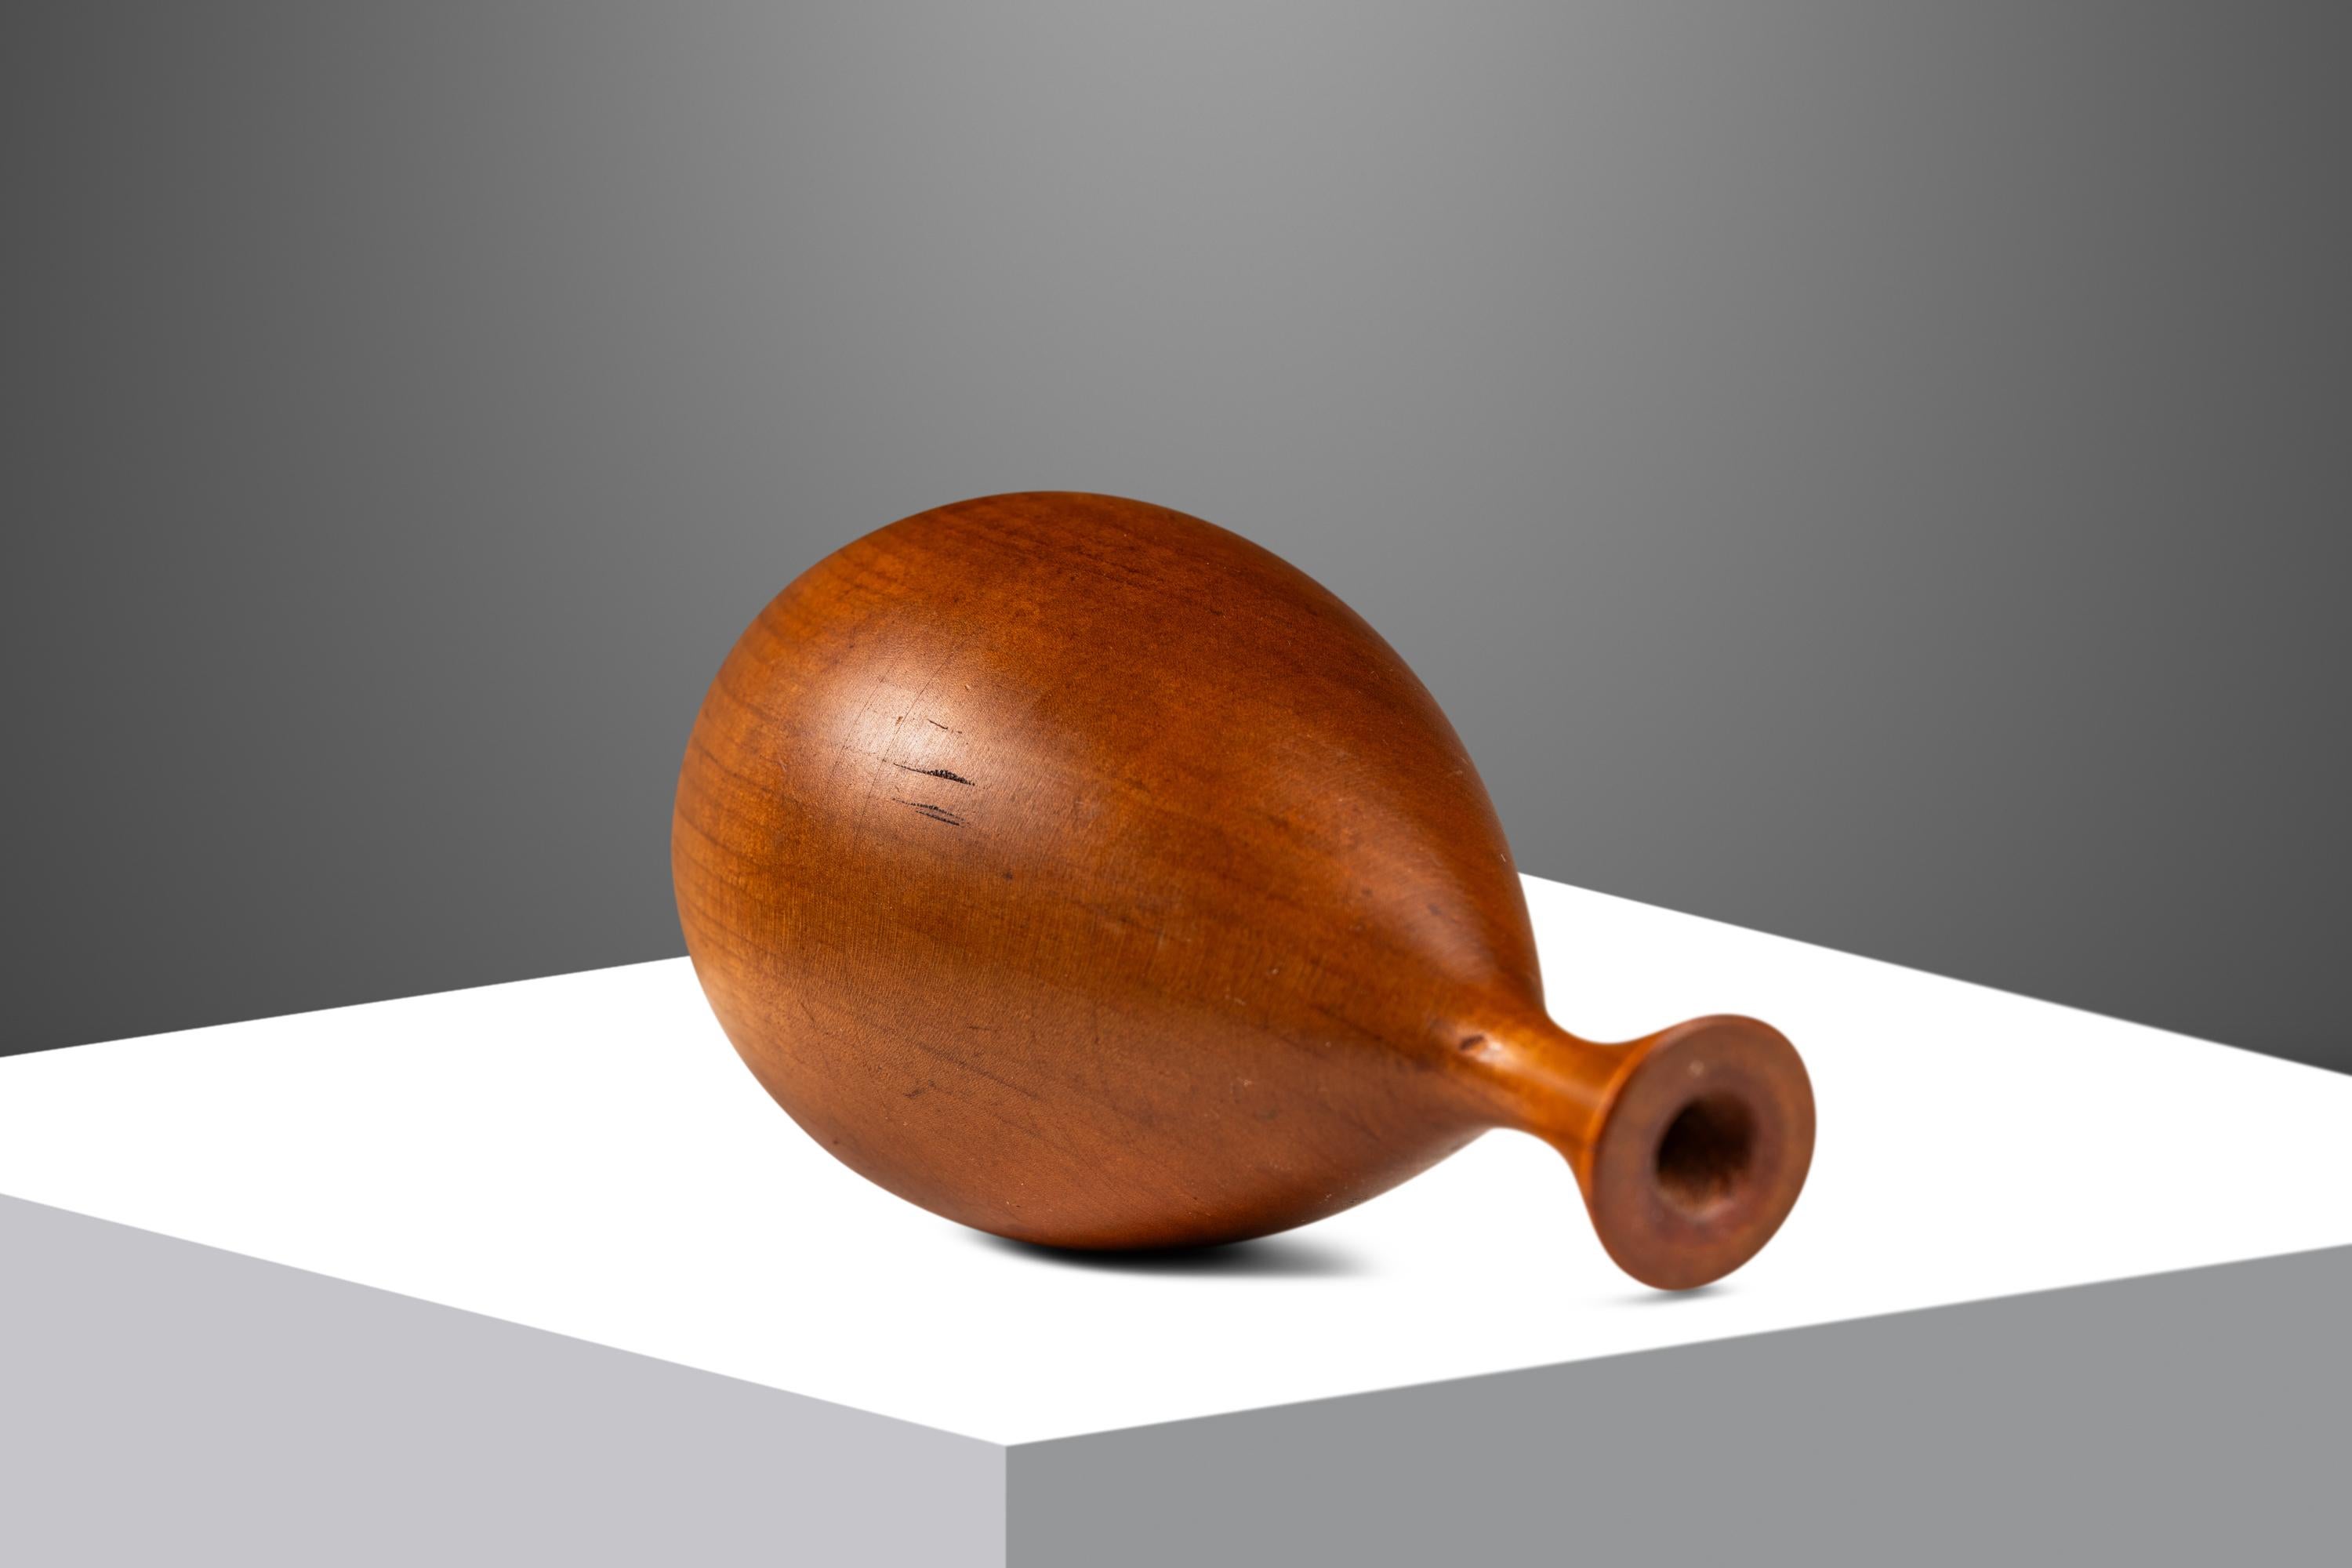 Late 20th Century Signed Petite Wood-Turned Vase in solid Walnut by George Biersdorf, USA, c. 1979 For Sale